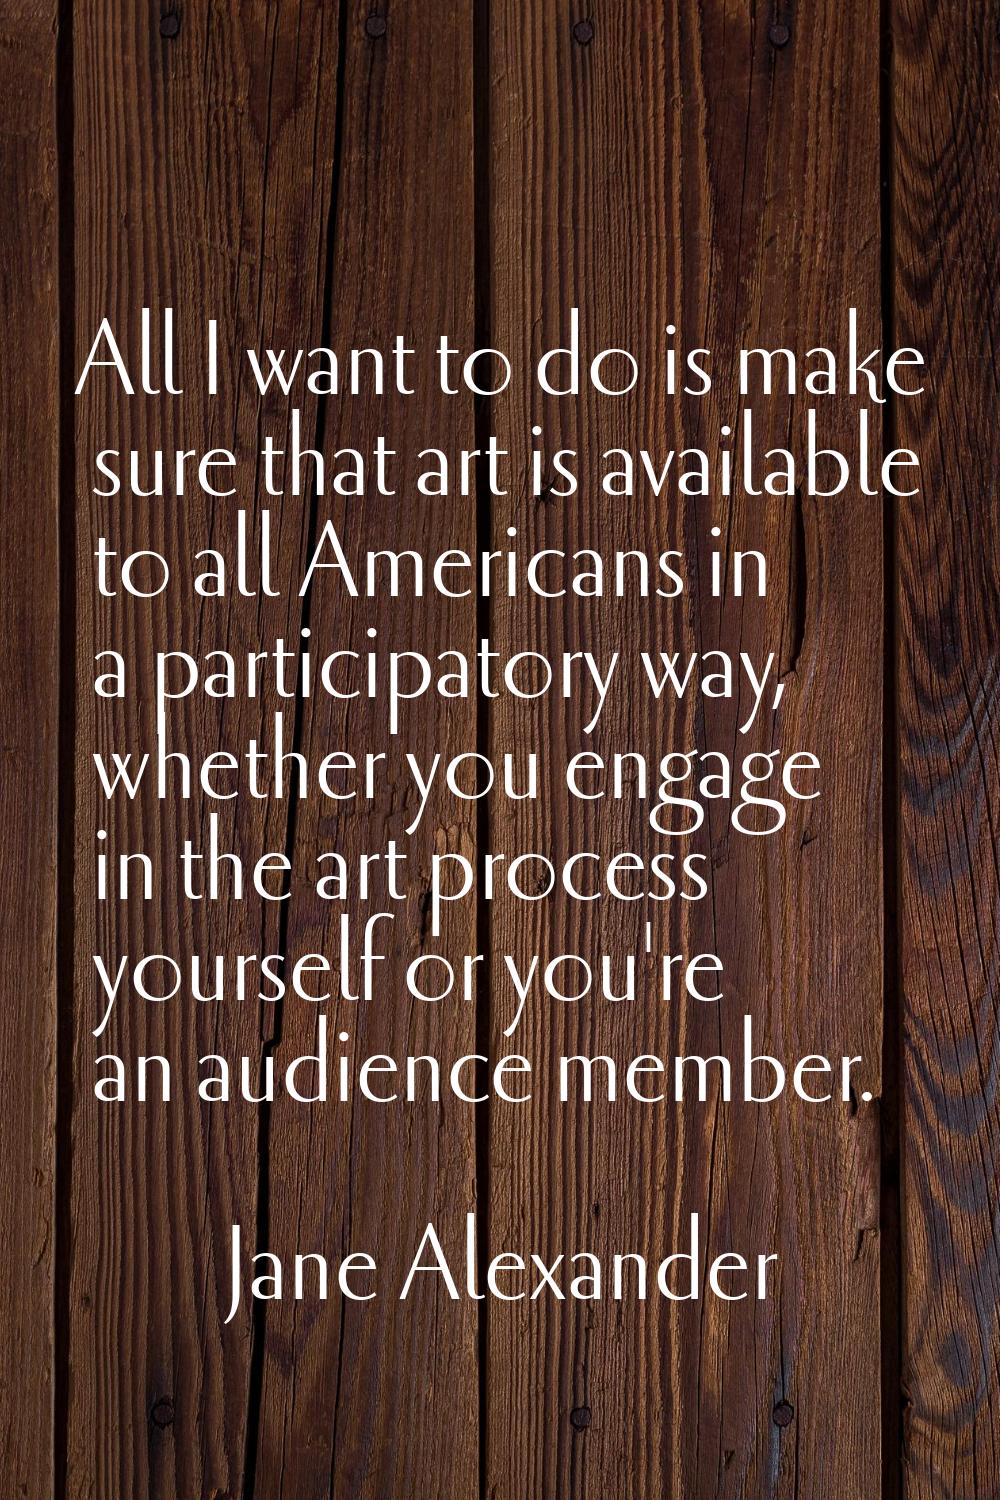 All I want to do is make sure that art is available to all Americans in a participatory way, whethe